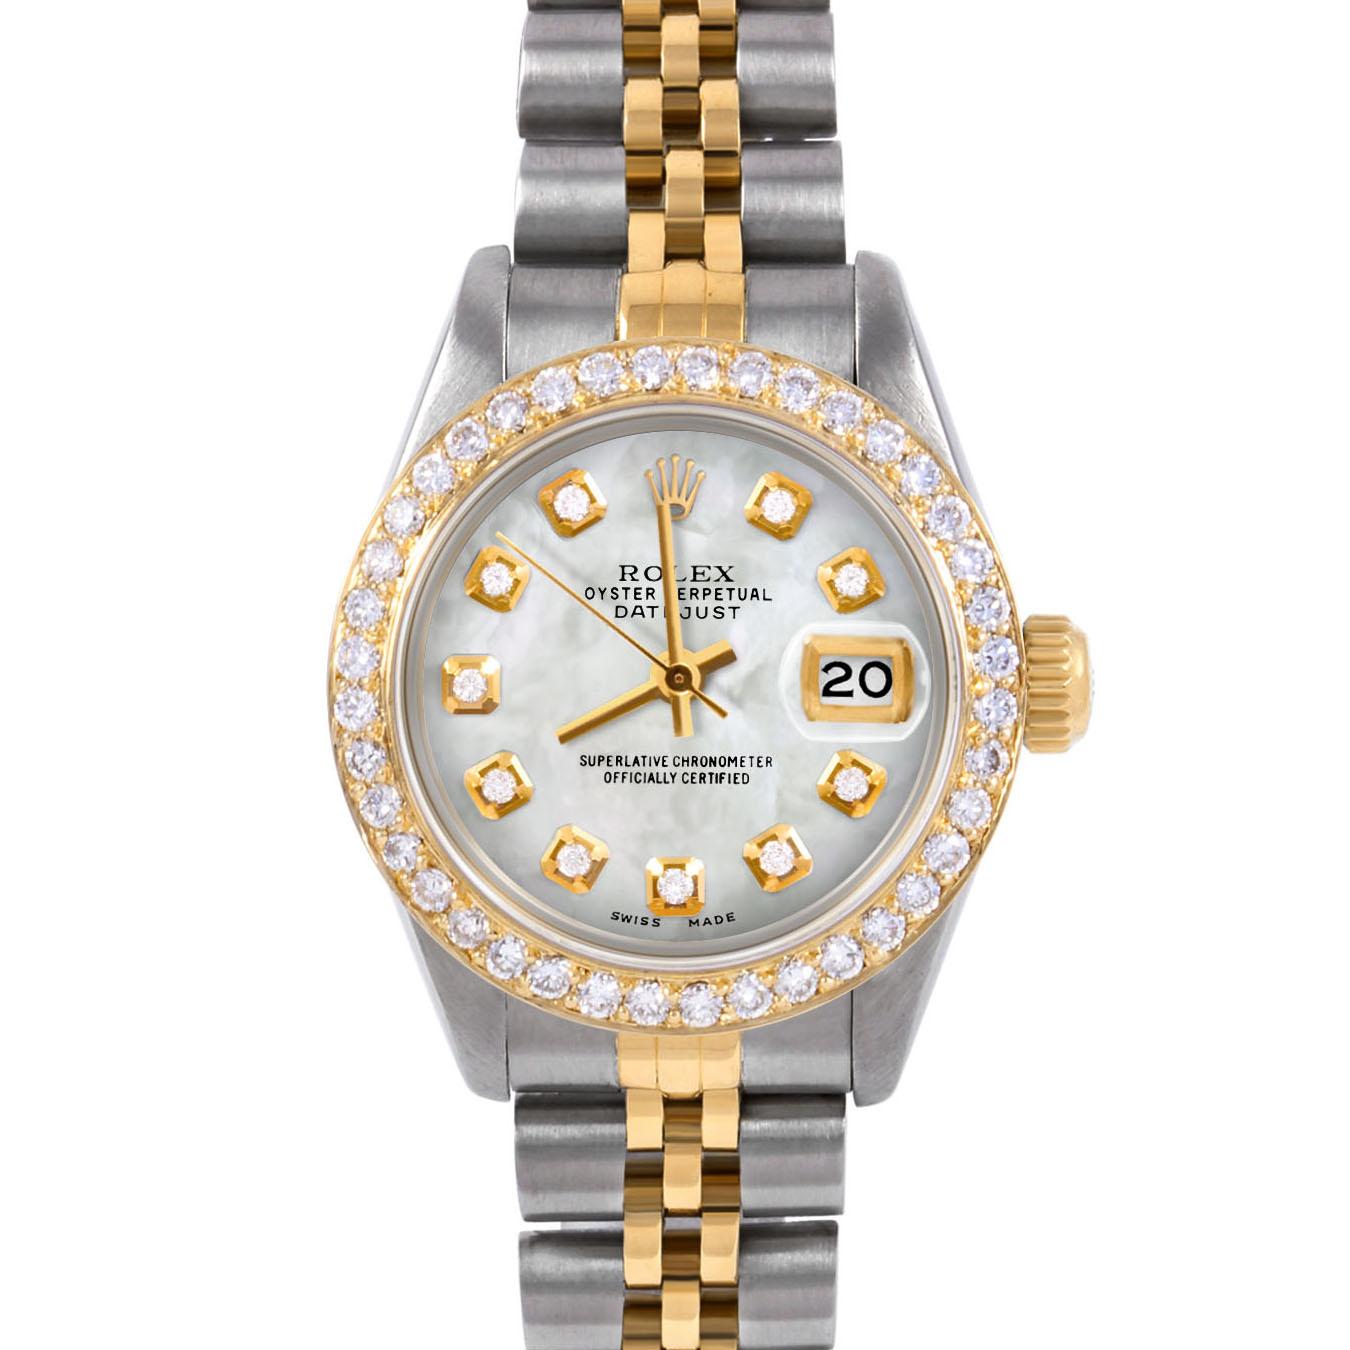 Swiss Wrist - SKU 6917-TT-WMOP-DIA-AM-BDS-JBL

Brand : Rolex
Model : Datejust (Non-Quickset Model)
Gender : Ladies
Metals : 14K/Stainless Steel
Case Size : 26 mm

Dial : Custom Mother Of Pearl Diamond Dial (This dial is not original Rolex And has